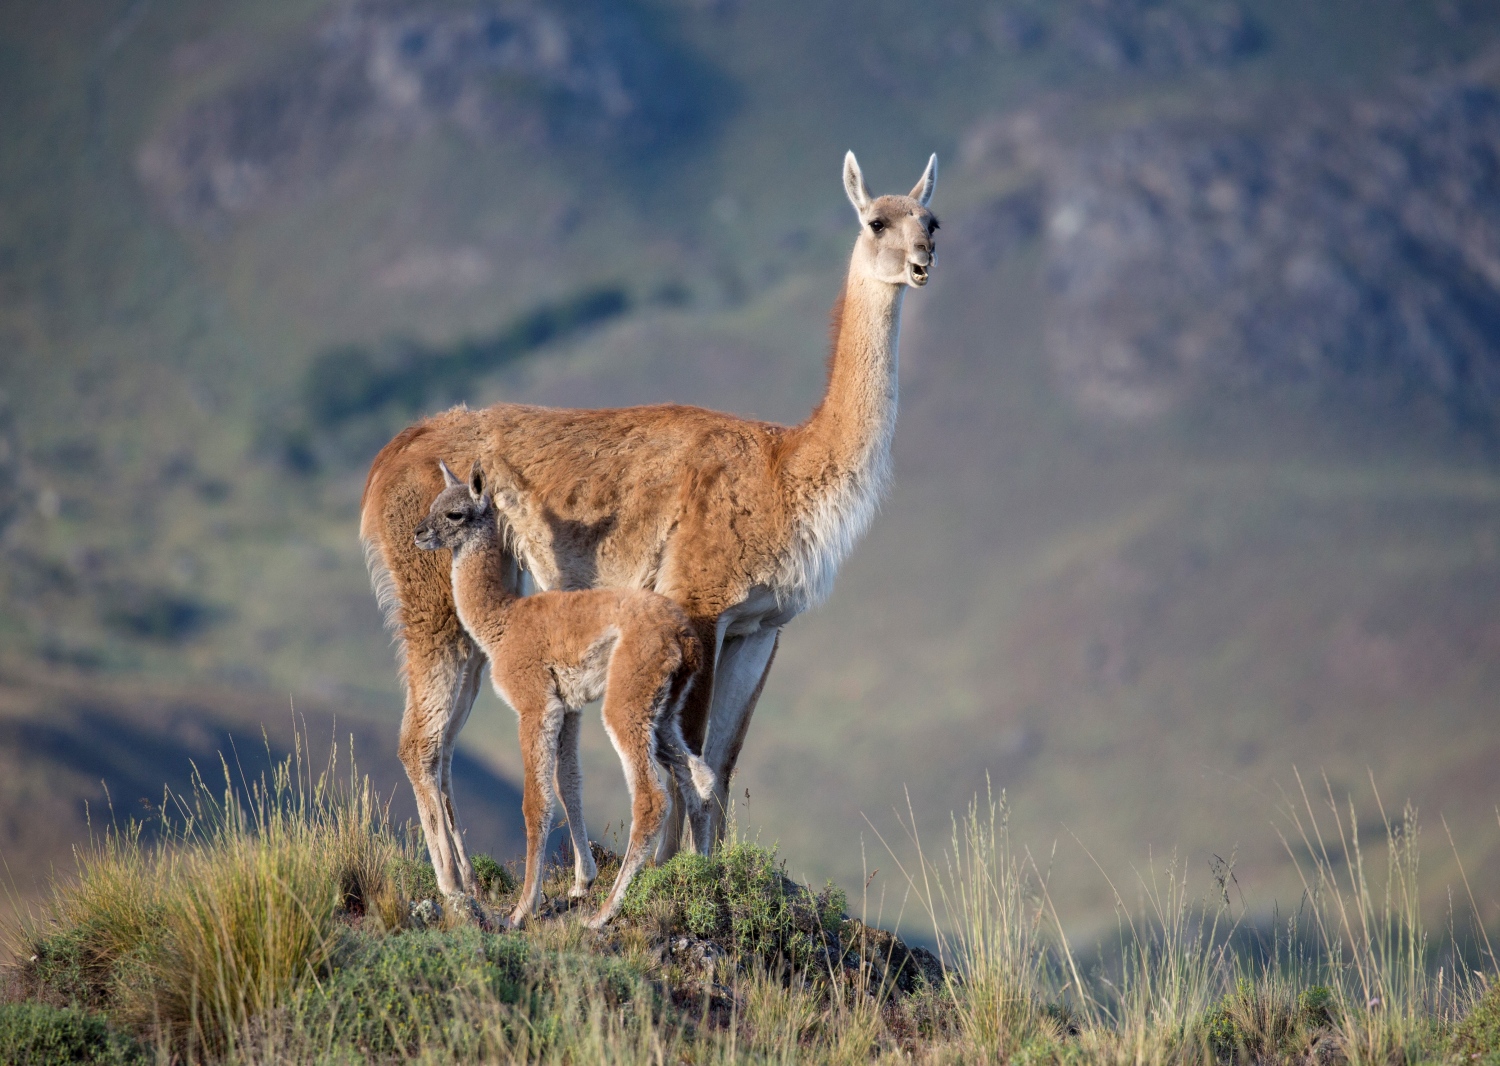 Adult and baby guanaco on mountain top, Patagonia